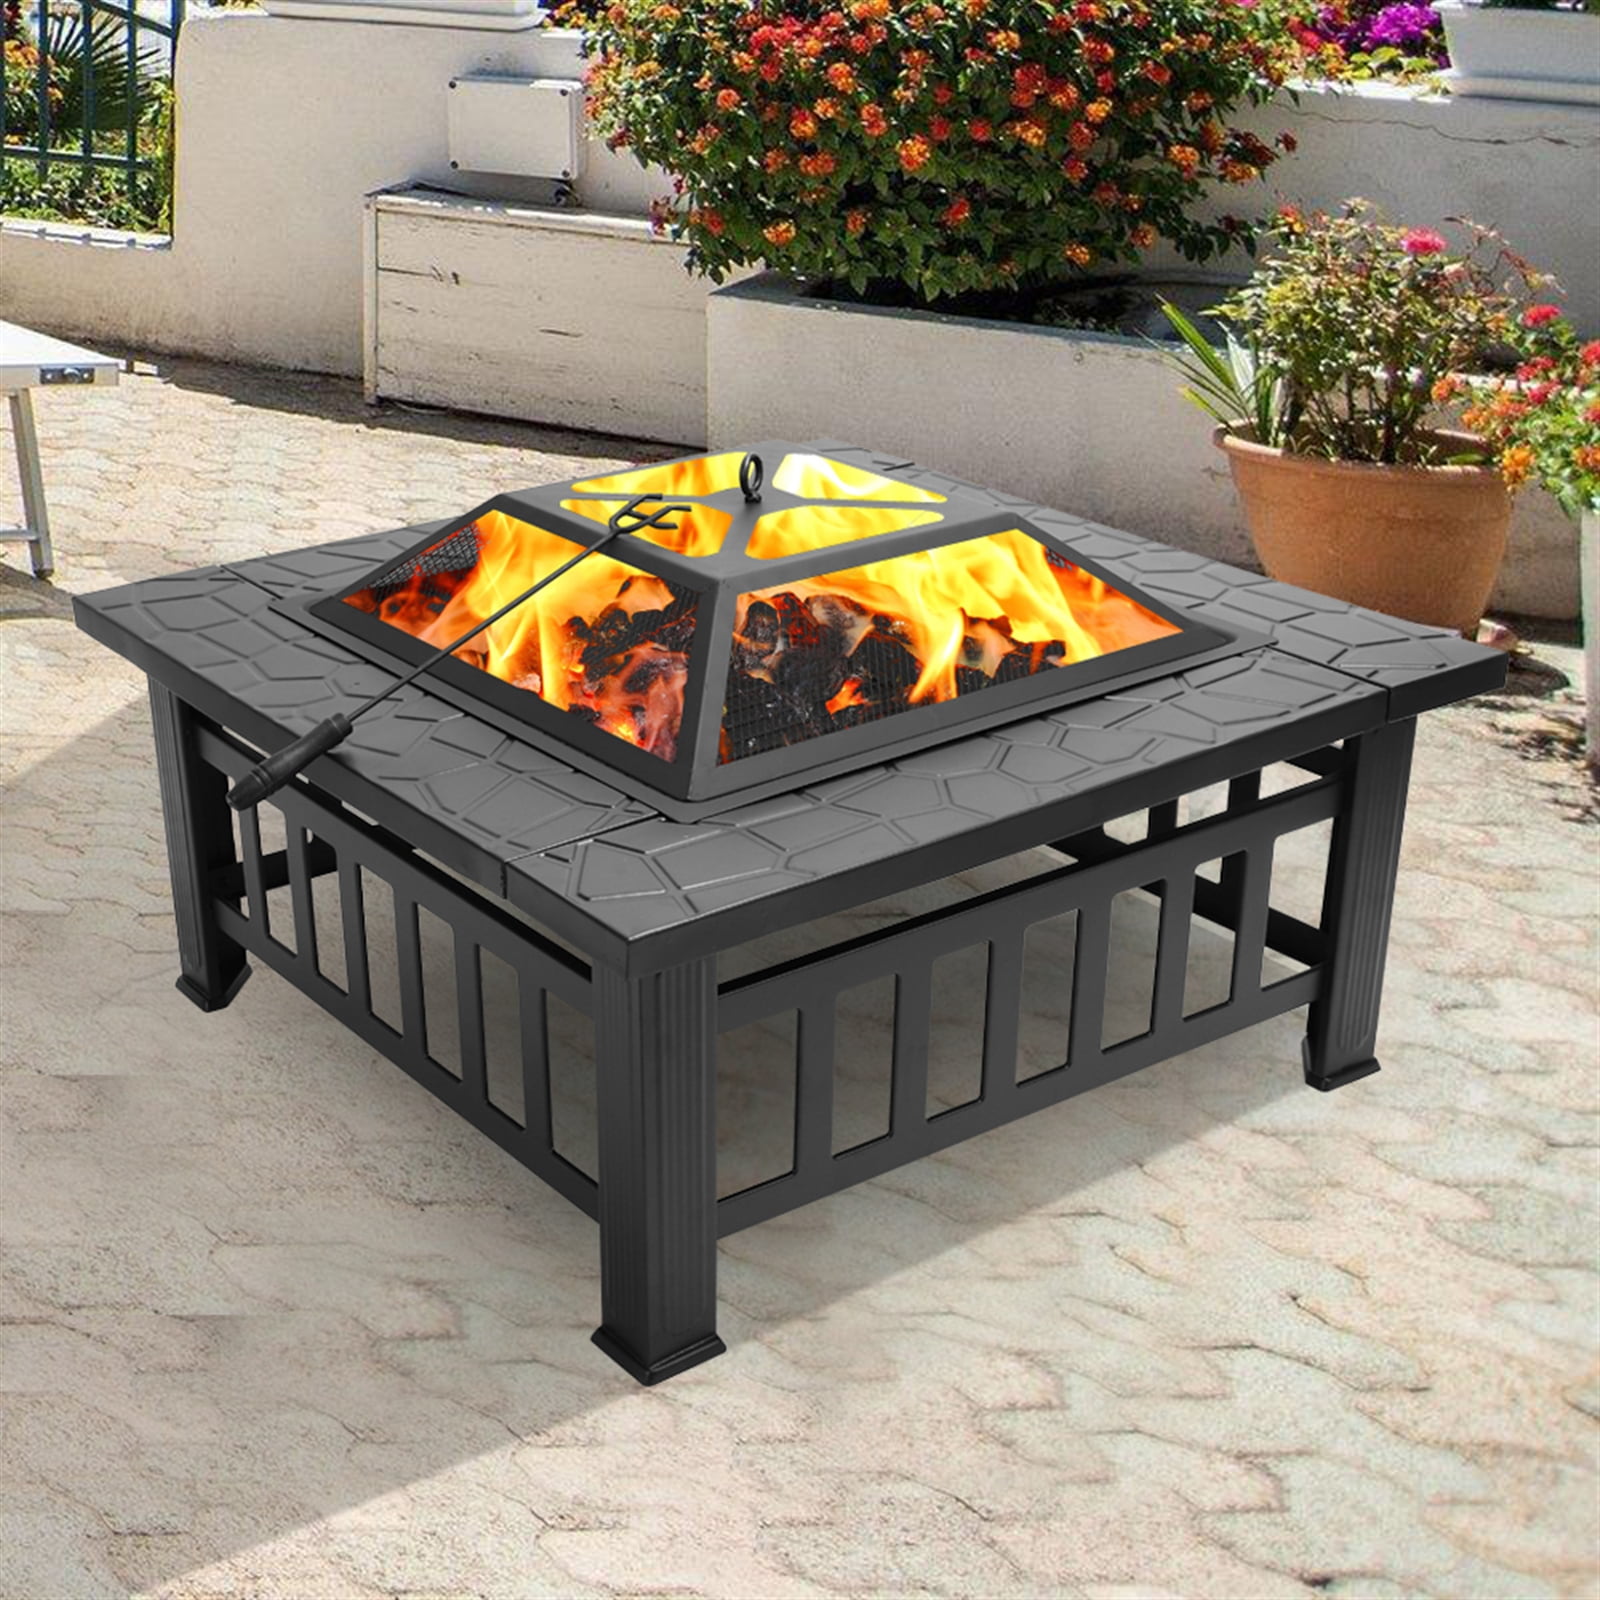 Details about   Outdoor Camping Steel Iron Fire Pit BBQ Backyard Patio Garden Stove Wood Burning 